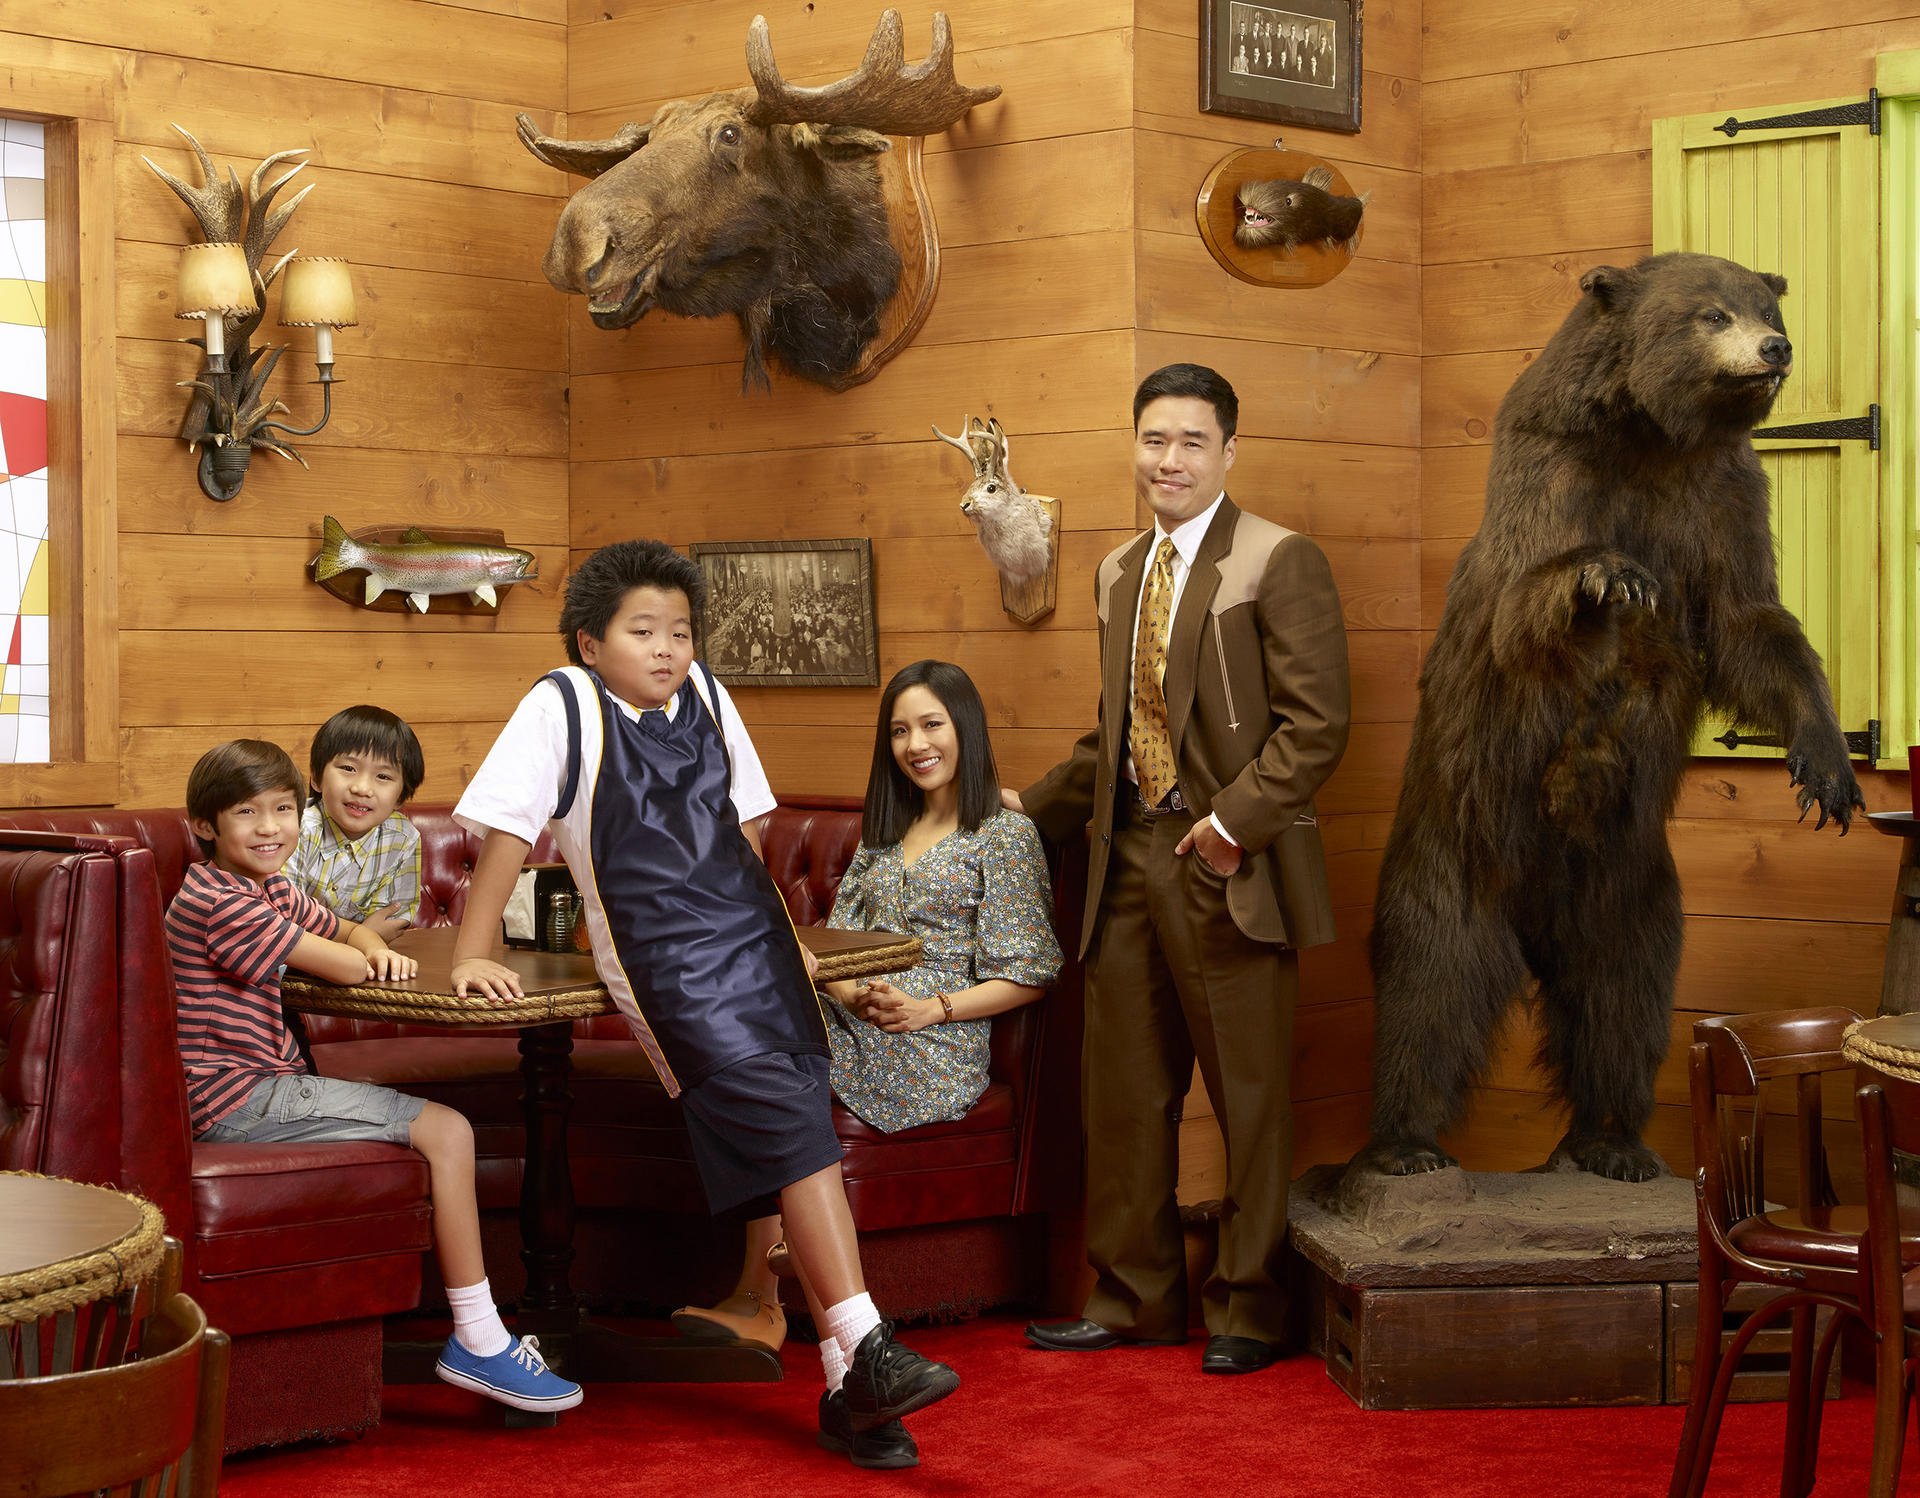 Hudson Yang (third from left) as the young Eddie Huang, with his family, in 
Fresh Off the Boat. Photo: The Washington Post